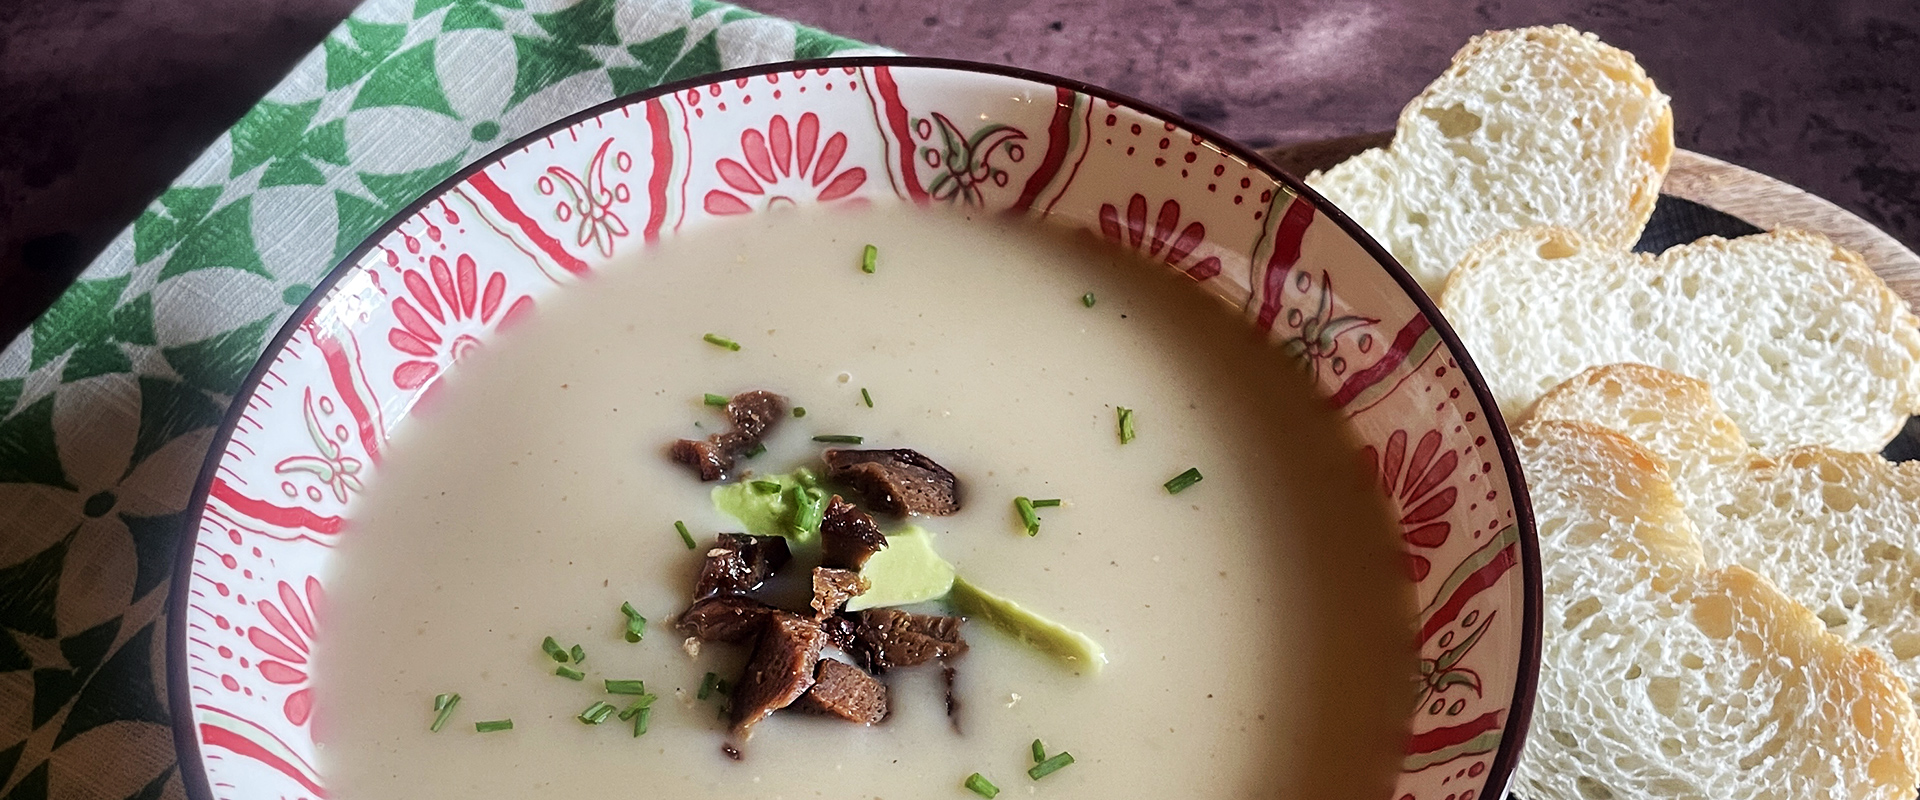 PAOW! Vichyssoise with Bacon Flavored Pieces